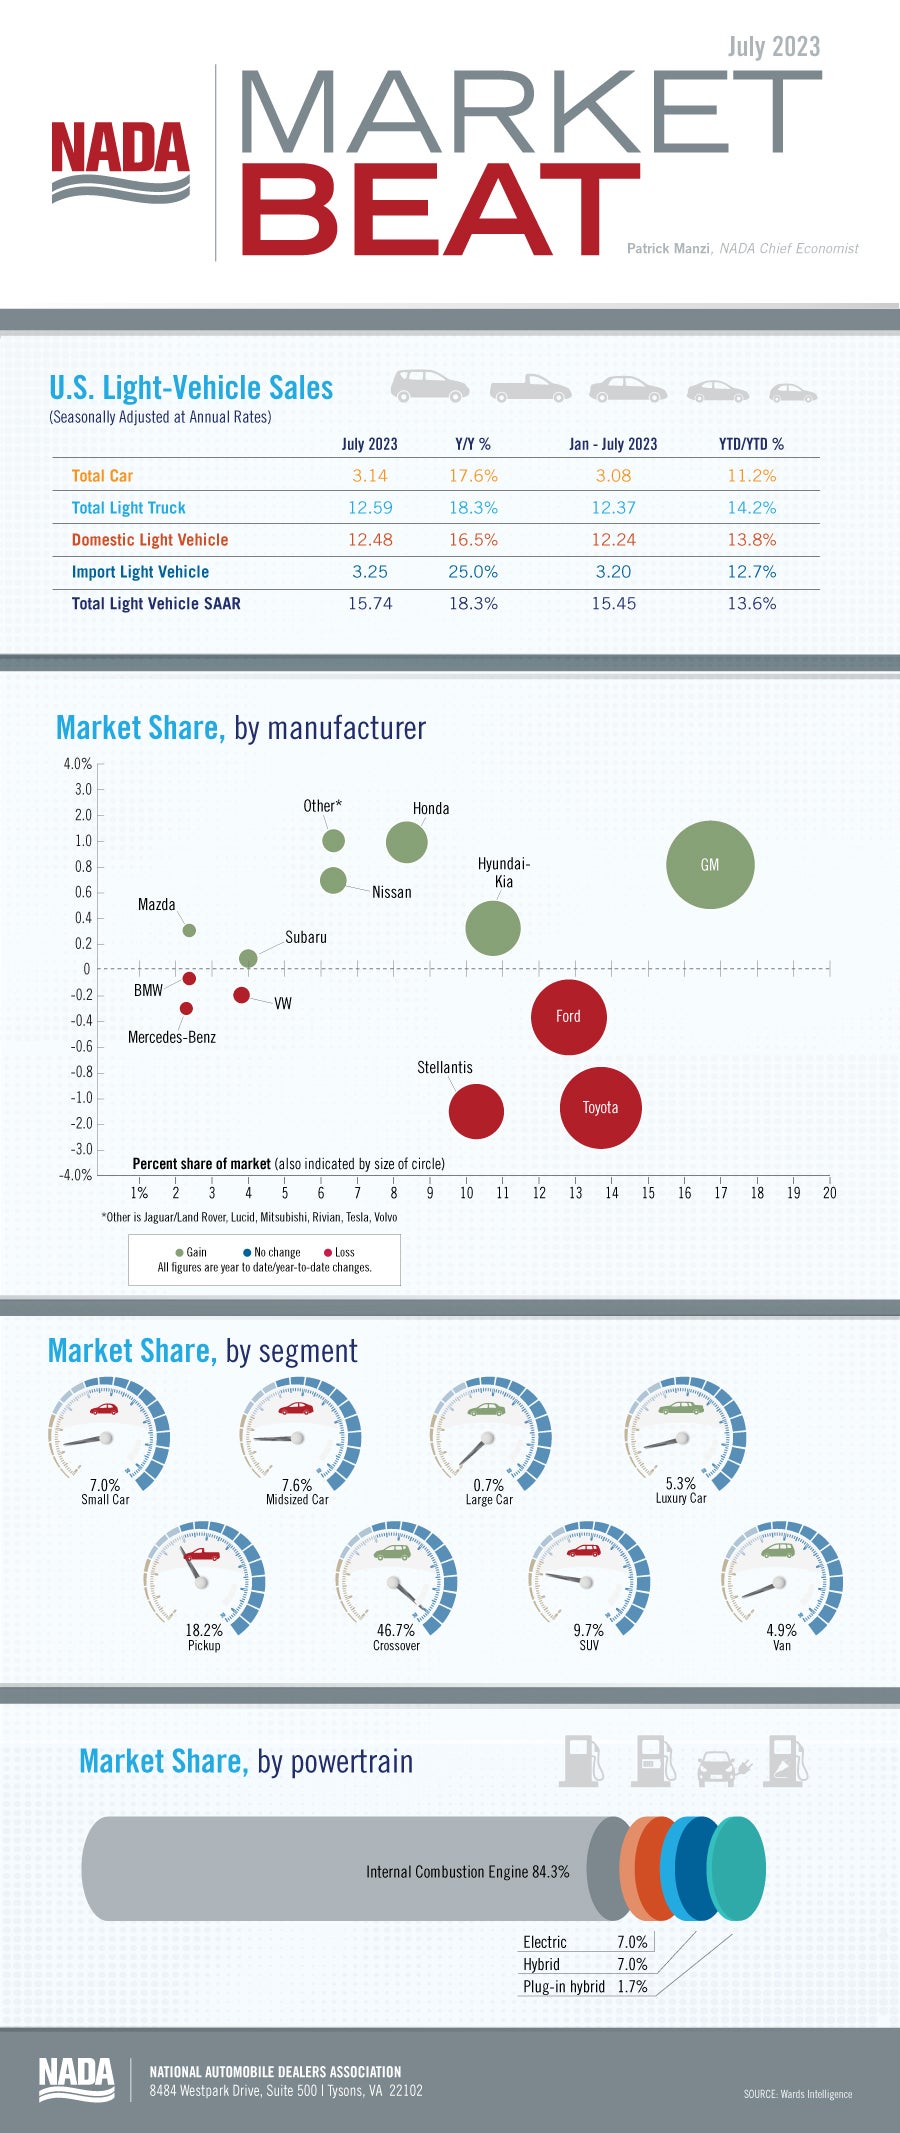 Market Beat July 2023 infographic